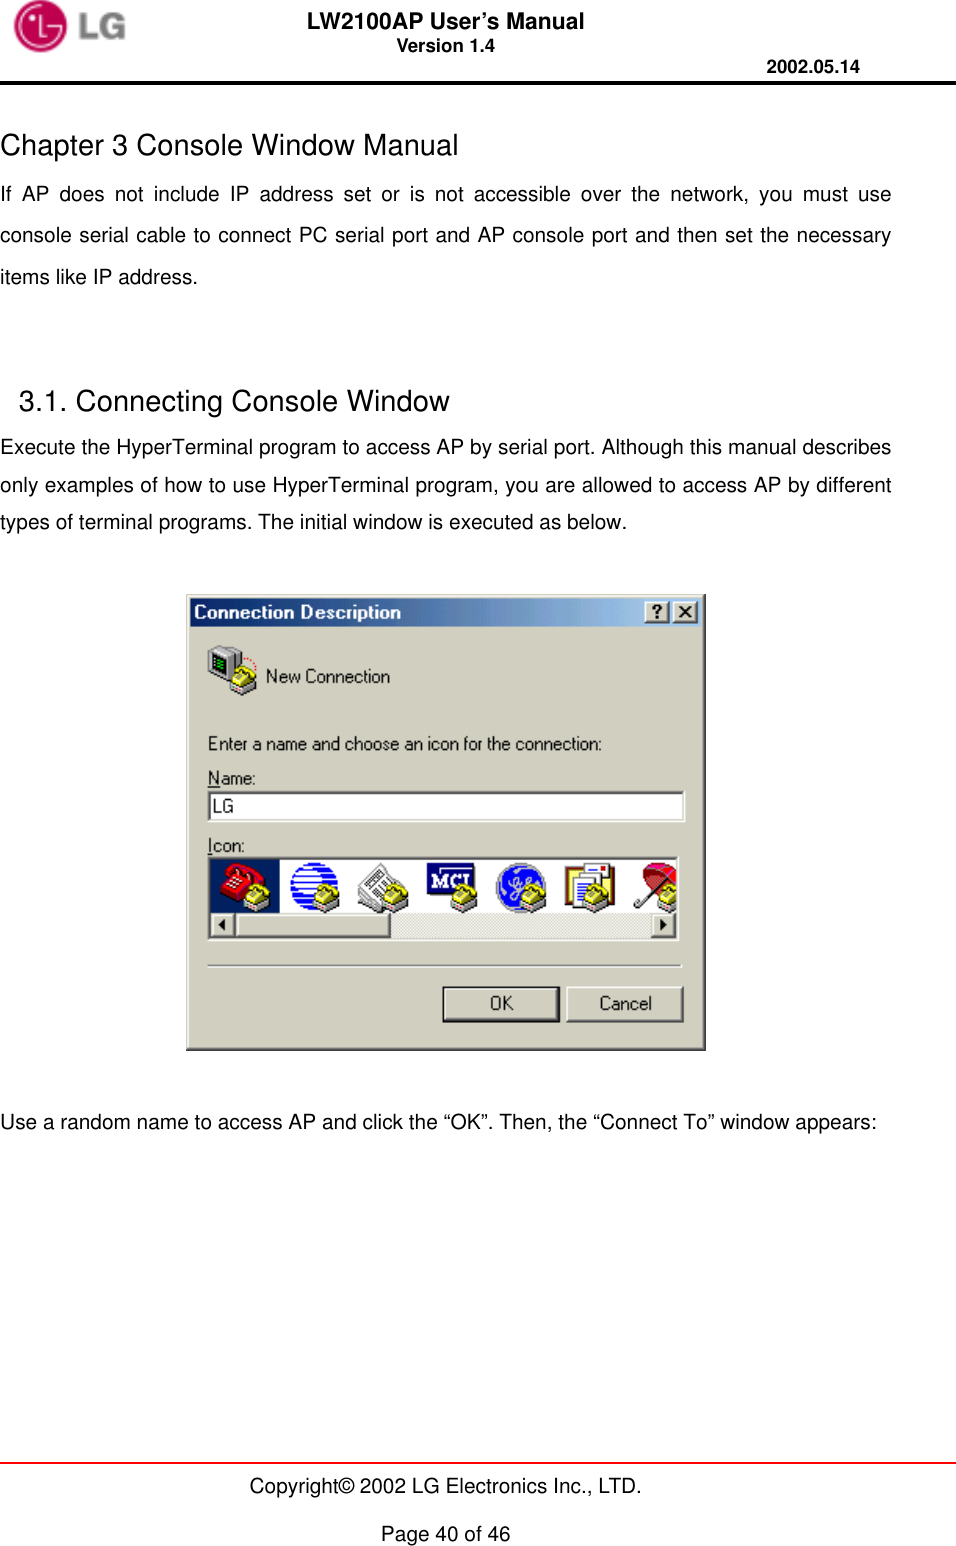 LW2100AP User’s Manual Version 1.4 2002.05.14   Copyright© 2002 LG Electronics Inc., LTD.  Page 40 of 46  Chapter 3 Console Window Manual   If AP does not include IP address set or is not accessible over the network, you must use console serial cable to connect PC serial port and AP console port and then set the necessary items like IP address.   3.1. Connecting Console Window   Execute the HyperTerminal program to access AP by serial port. Although this manual describes only examples of how to use HyperTerminal program, you are allowed to access AP by different types of terminal programs. The initial window is executed as below.    Use a random name to access AP and click the “OK”. Then, the “Connect To” window appears:  